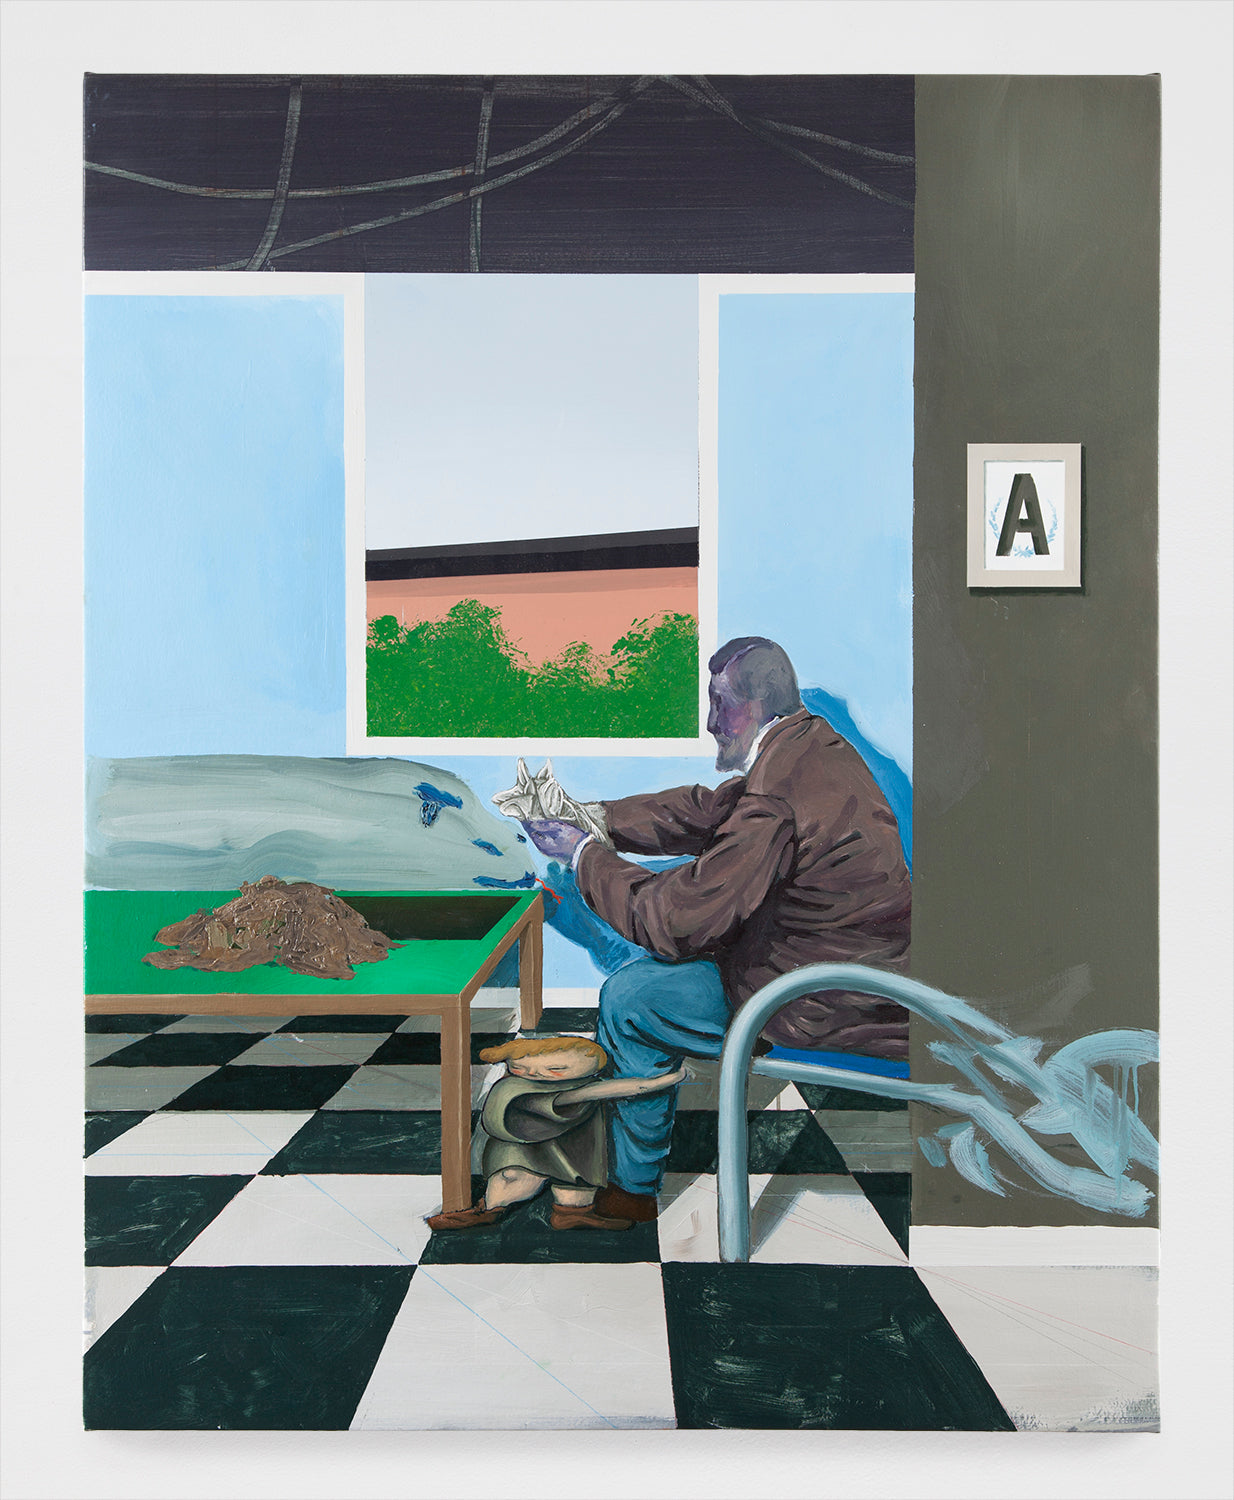 Kyle Utter, "Interior with a Snake"